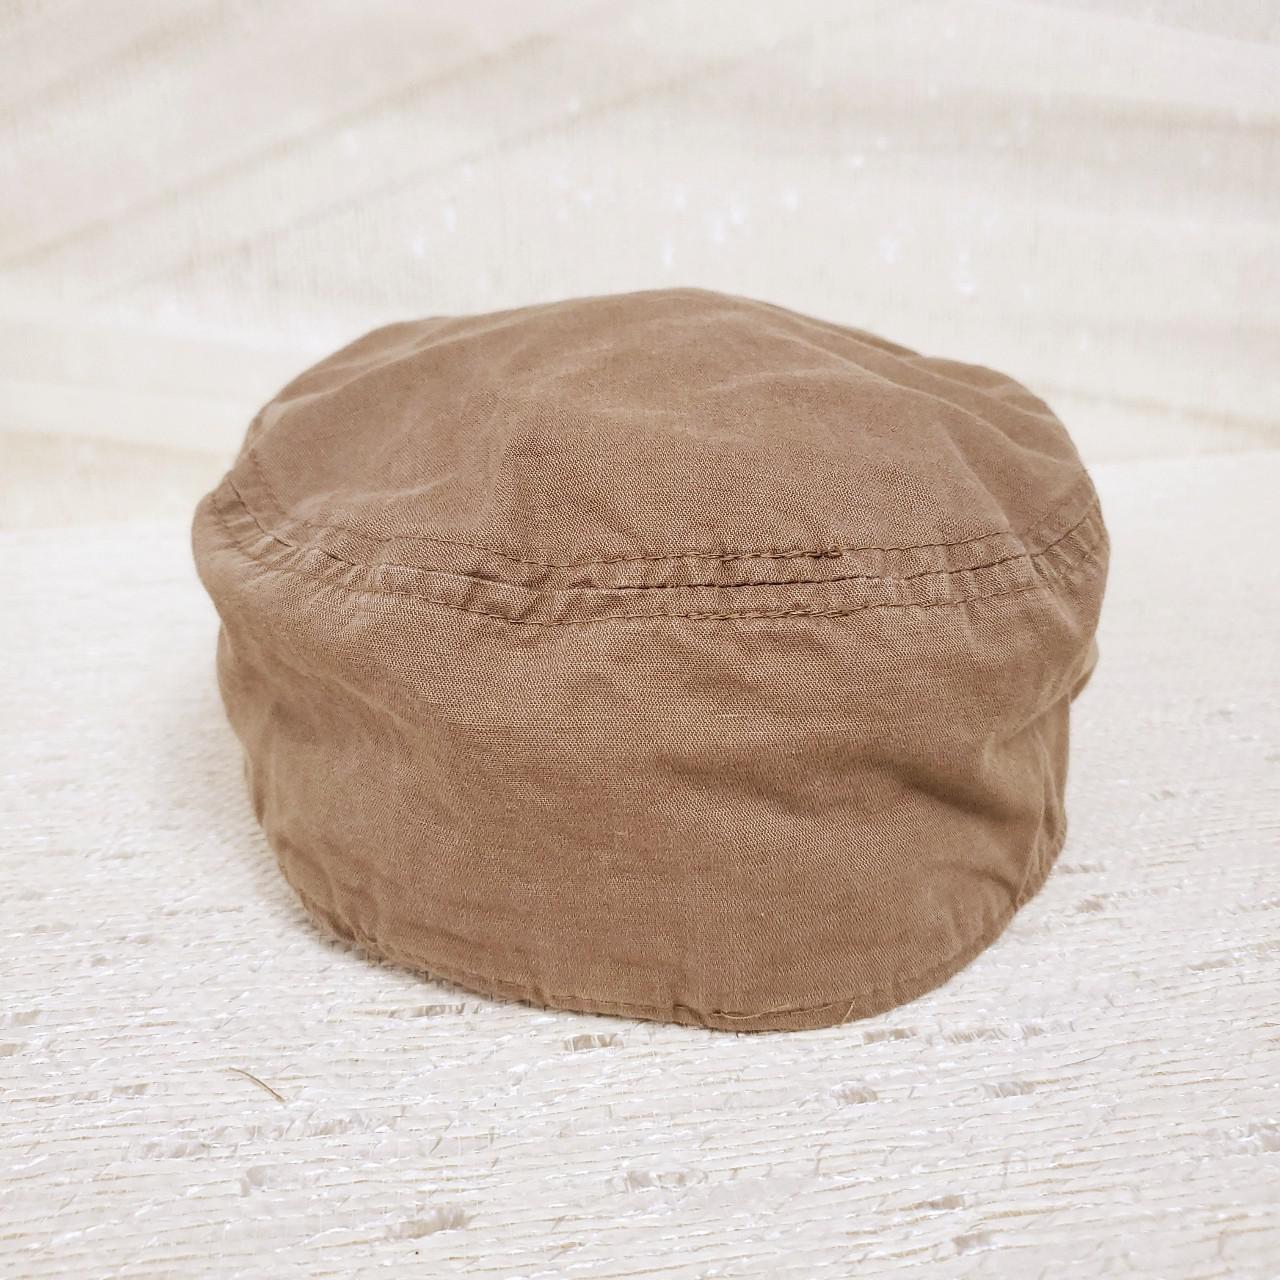 Product Image 3 - Y2k brown newsboy hat

Fabric is